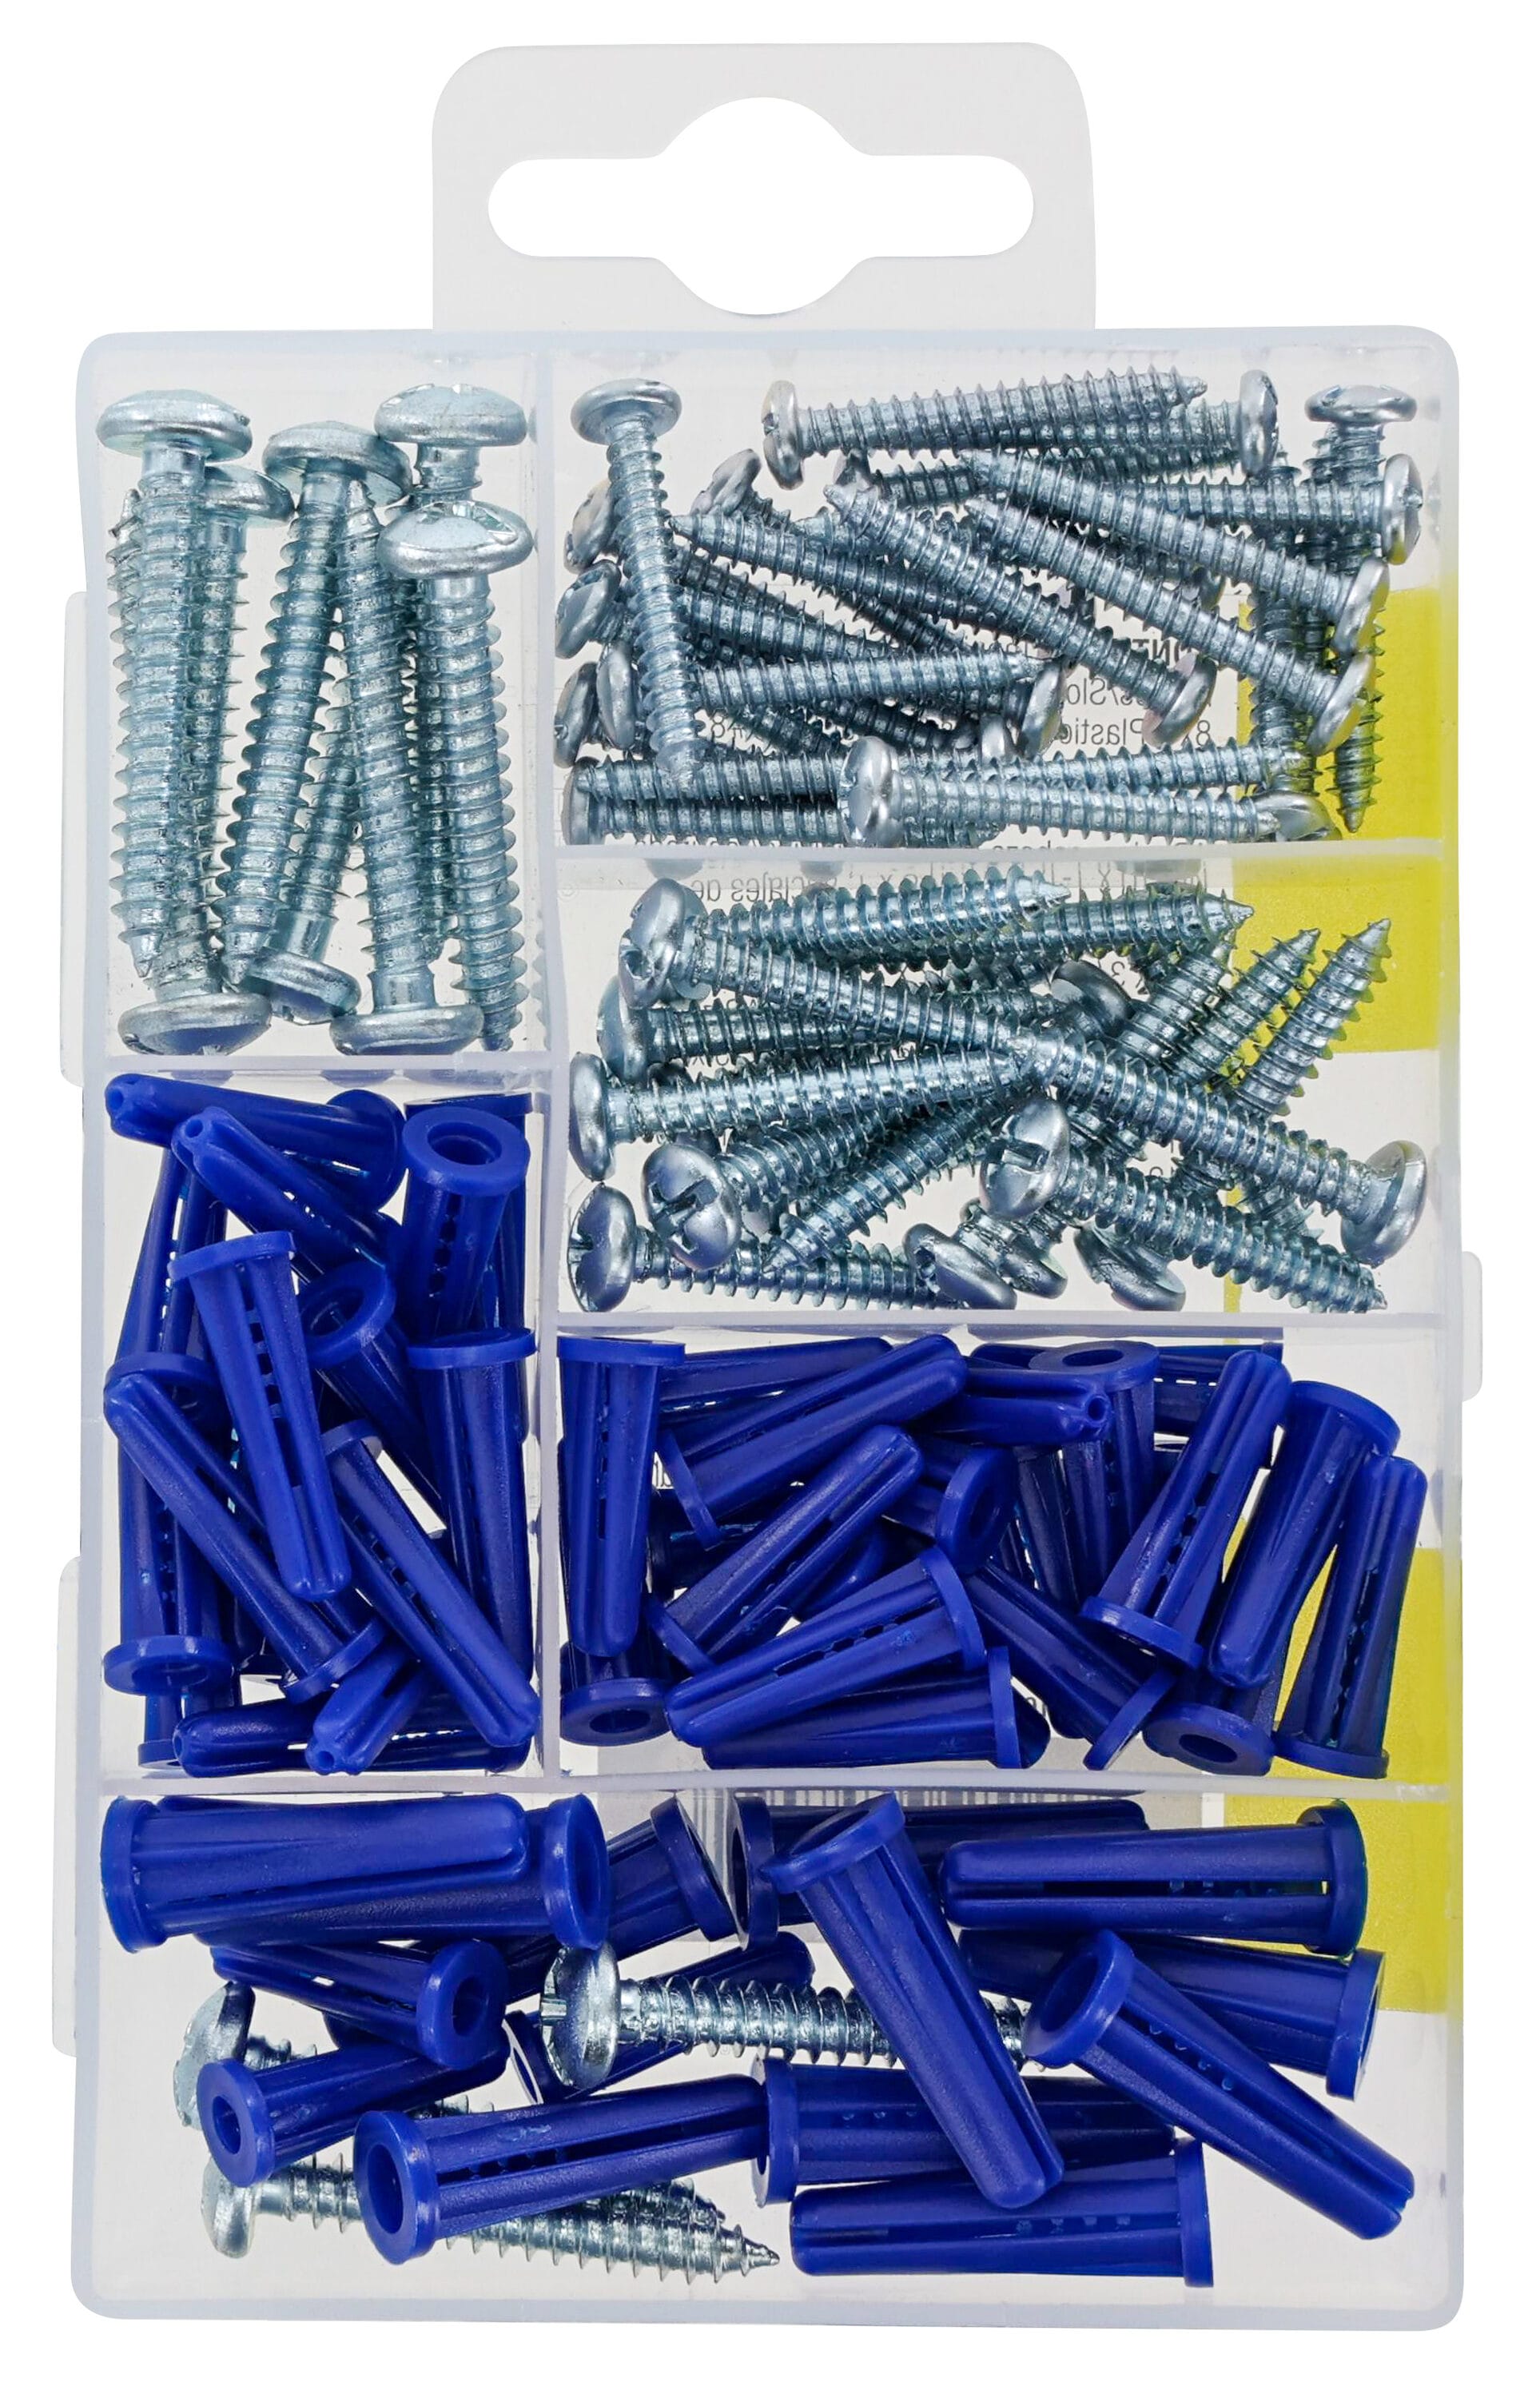 Hillman 6 In Multiple Colorsfinishes Assortment Kit 100 Pack In The Specialty Fasteners 